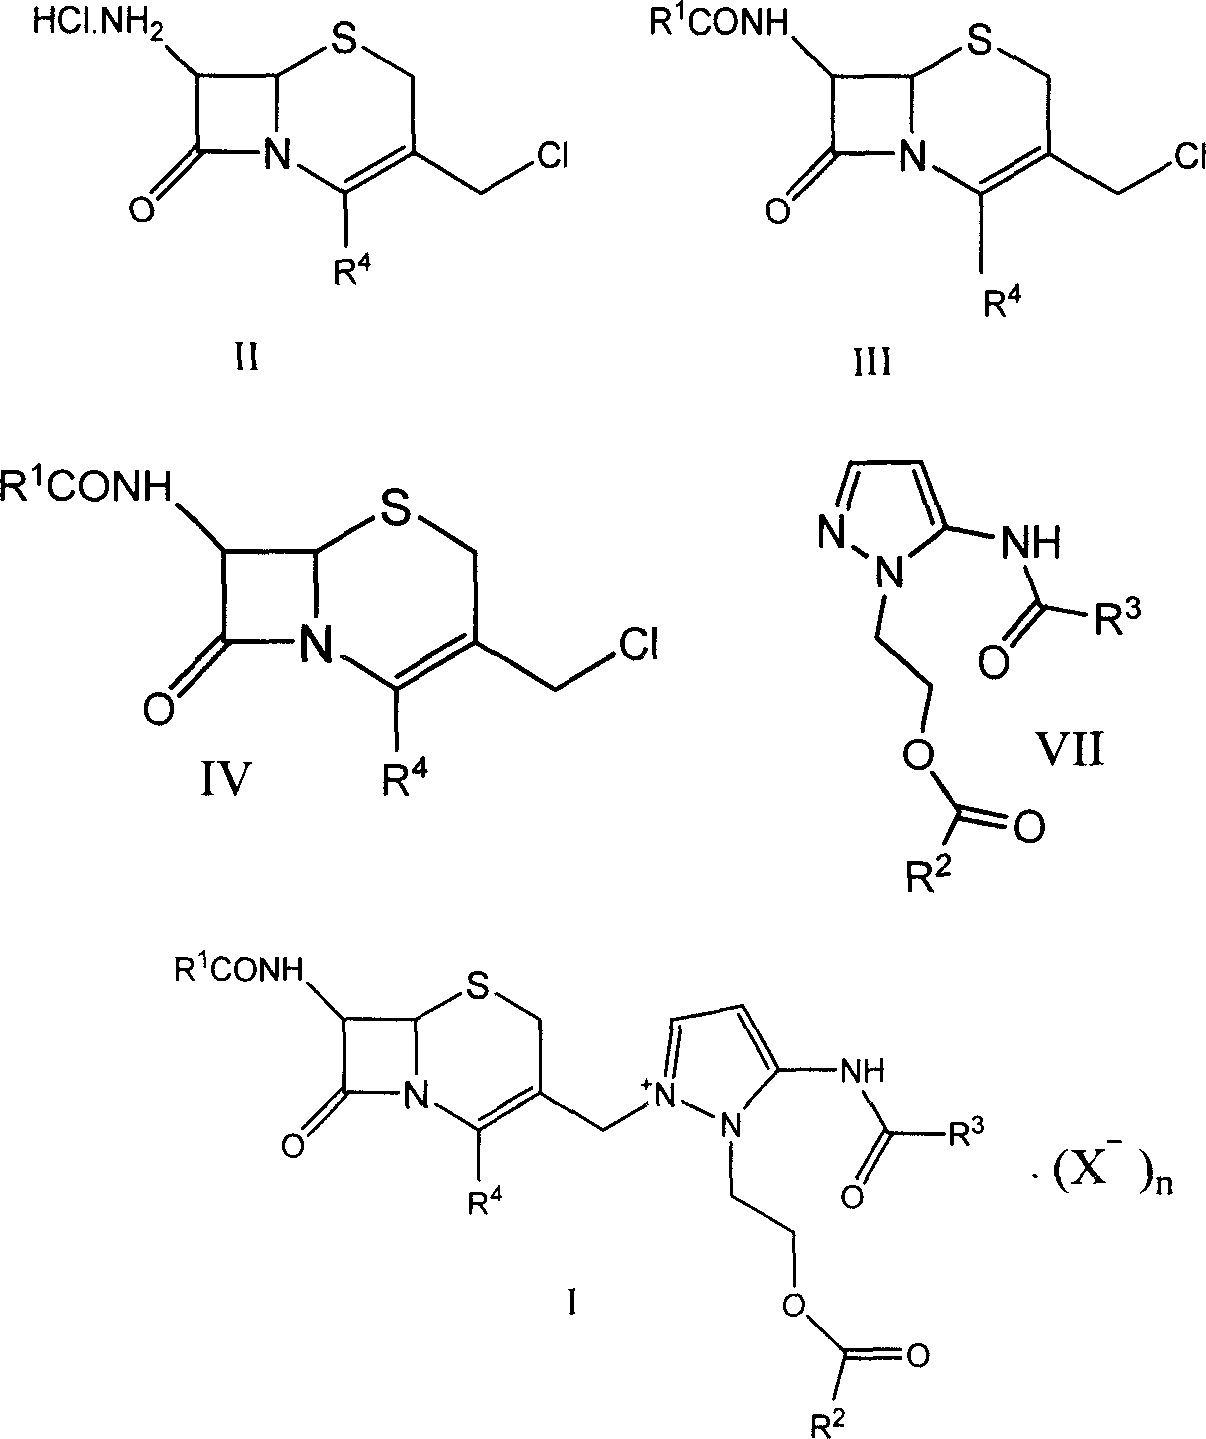 Cephaene onium salt compound and its preparation, and synthesis of cephapyrazde sulfate therefrom